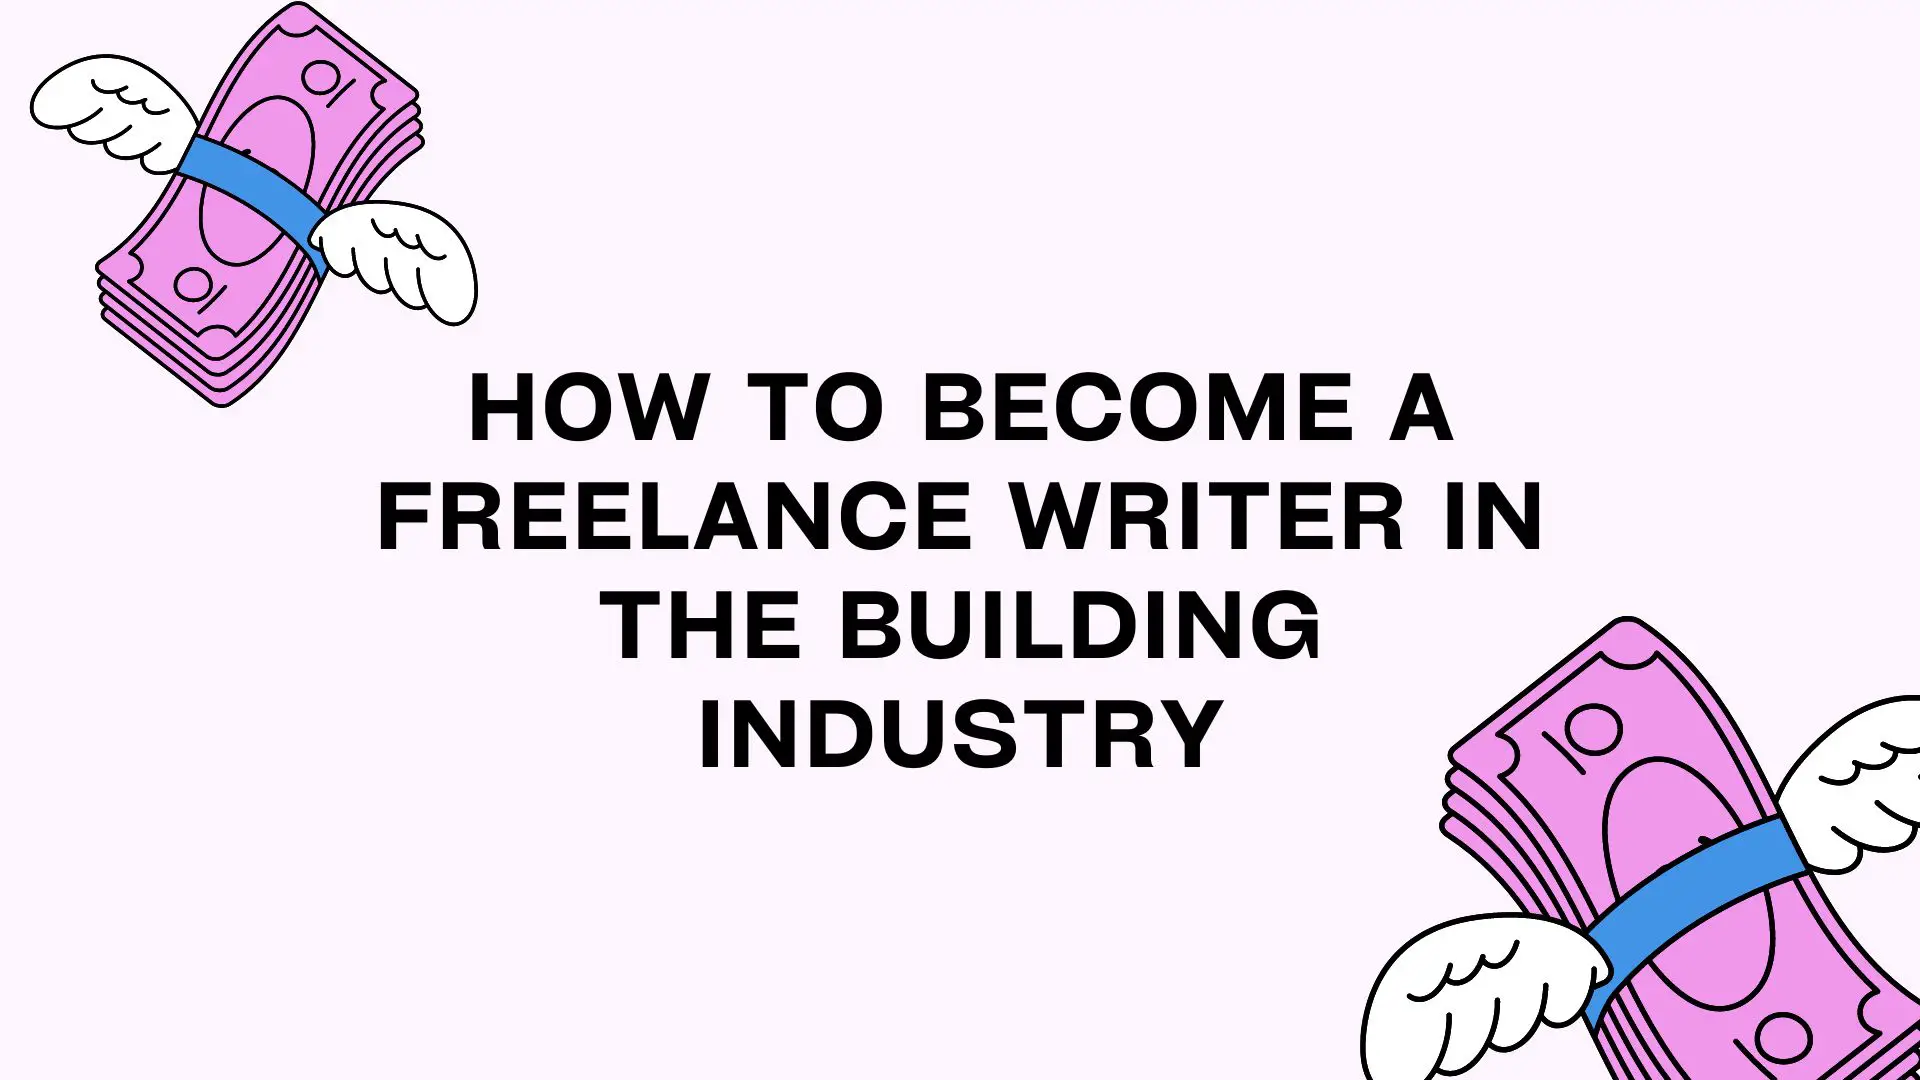 How To Become A Freelance Writer In The Building Industry